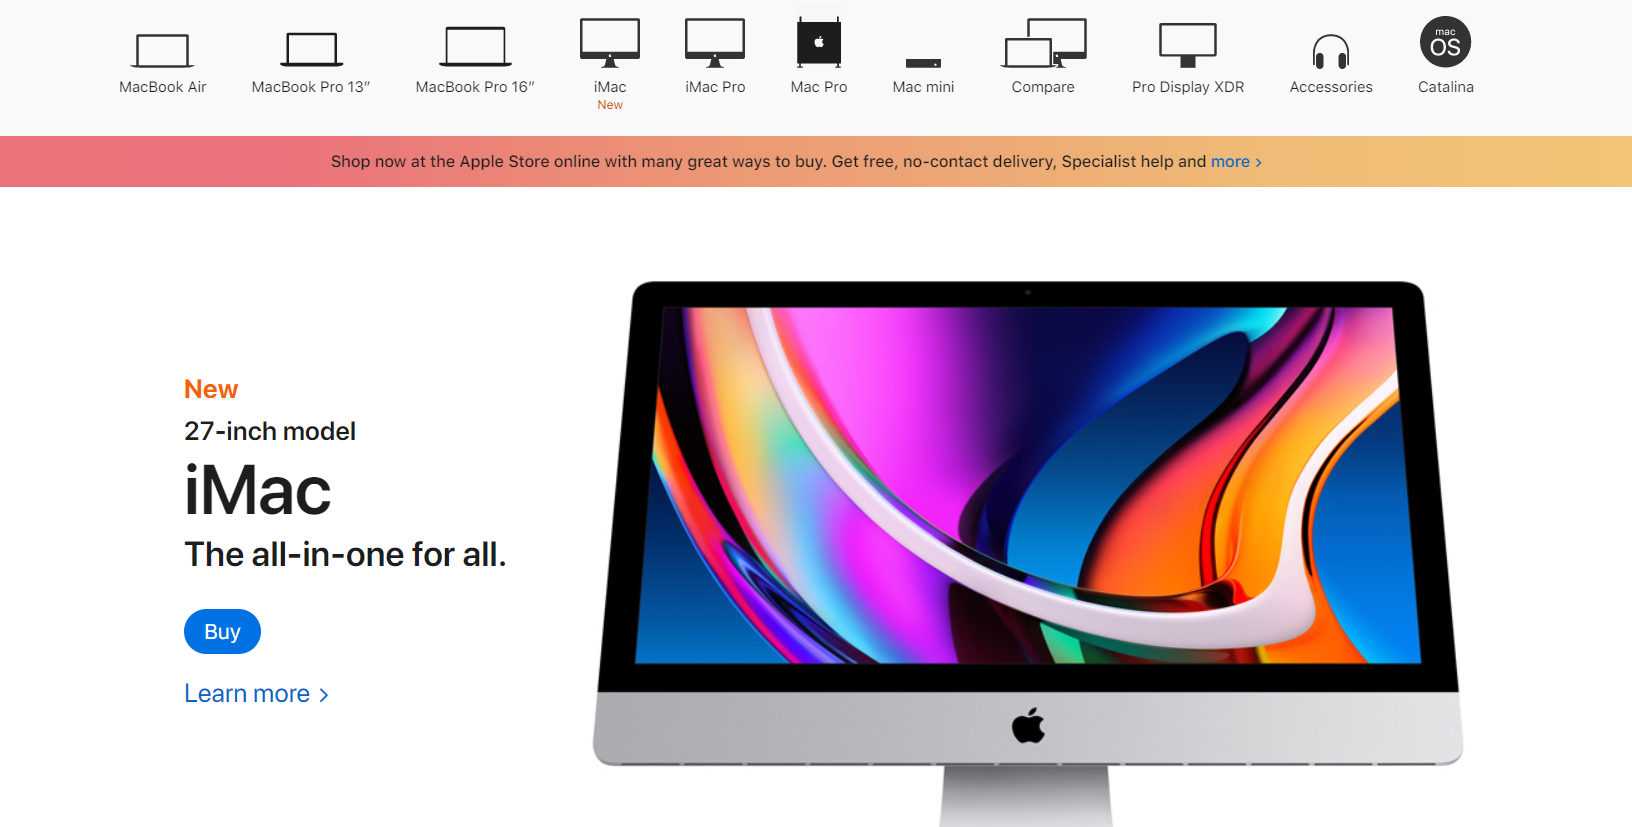 How to Customize iMac in India on Apple Online Store